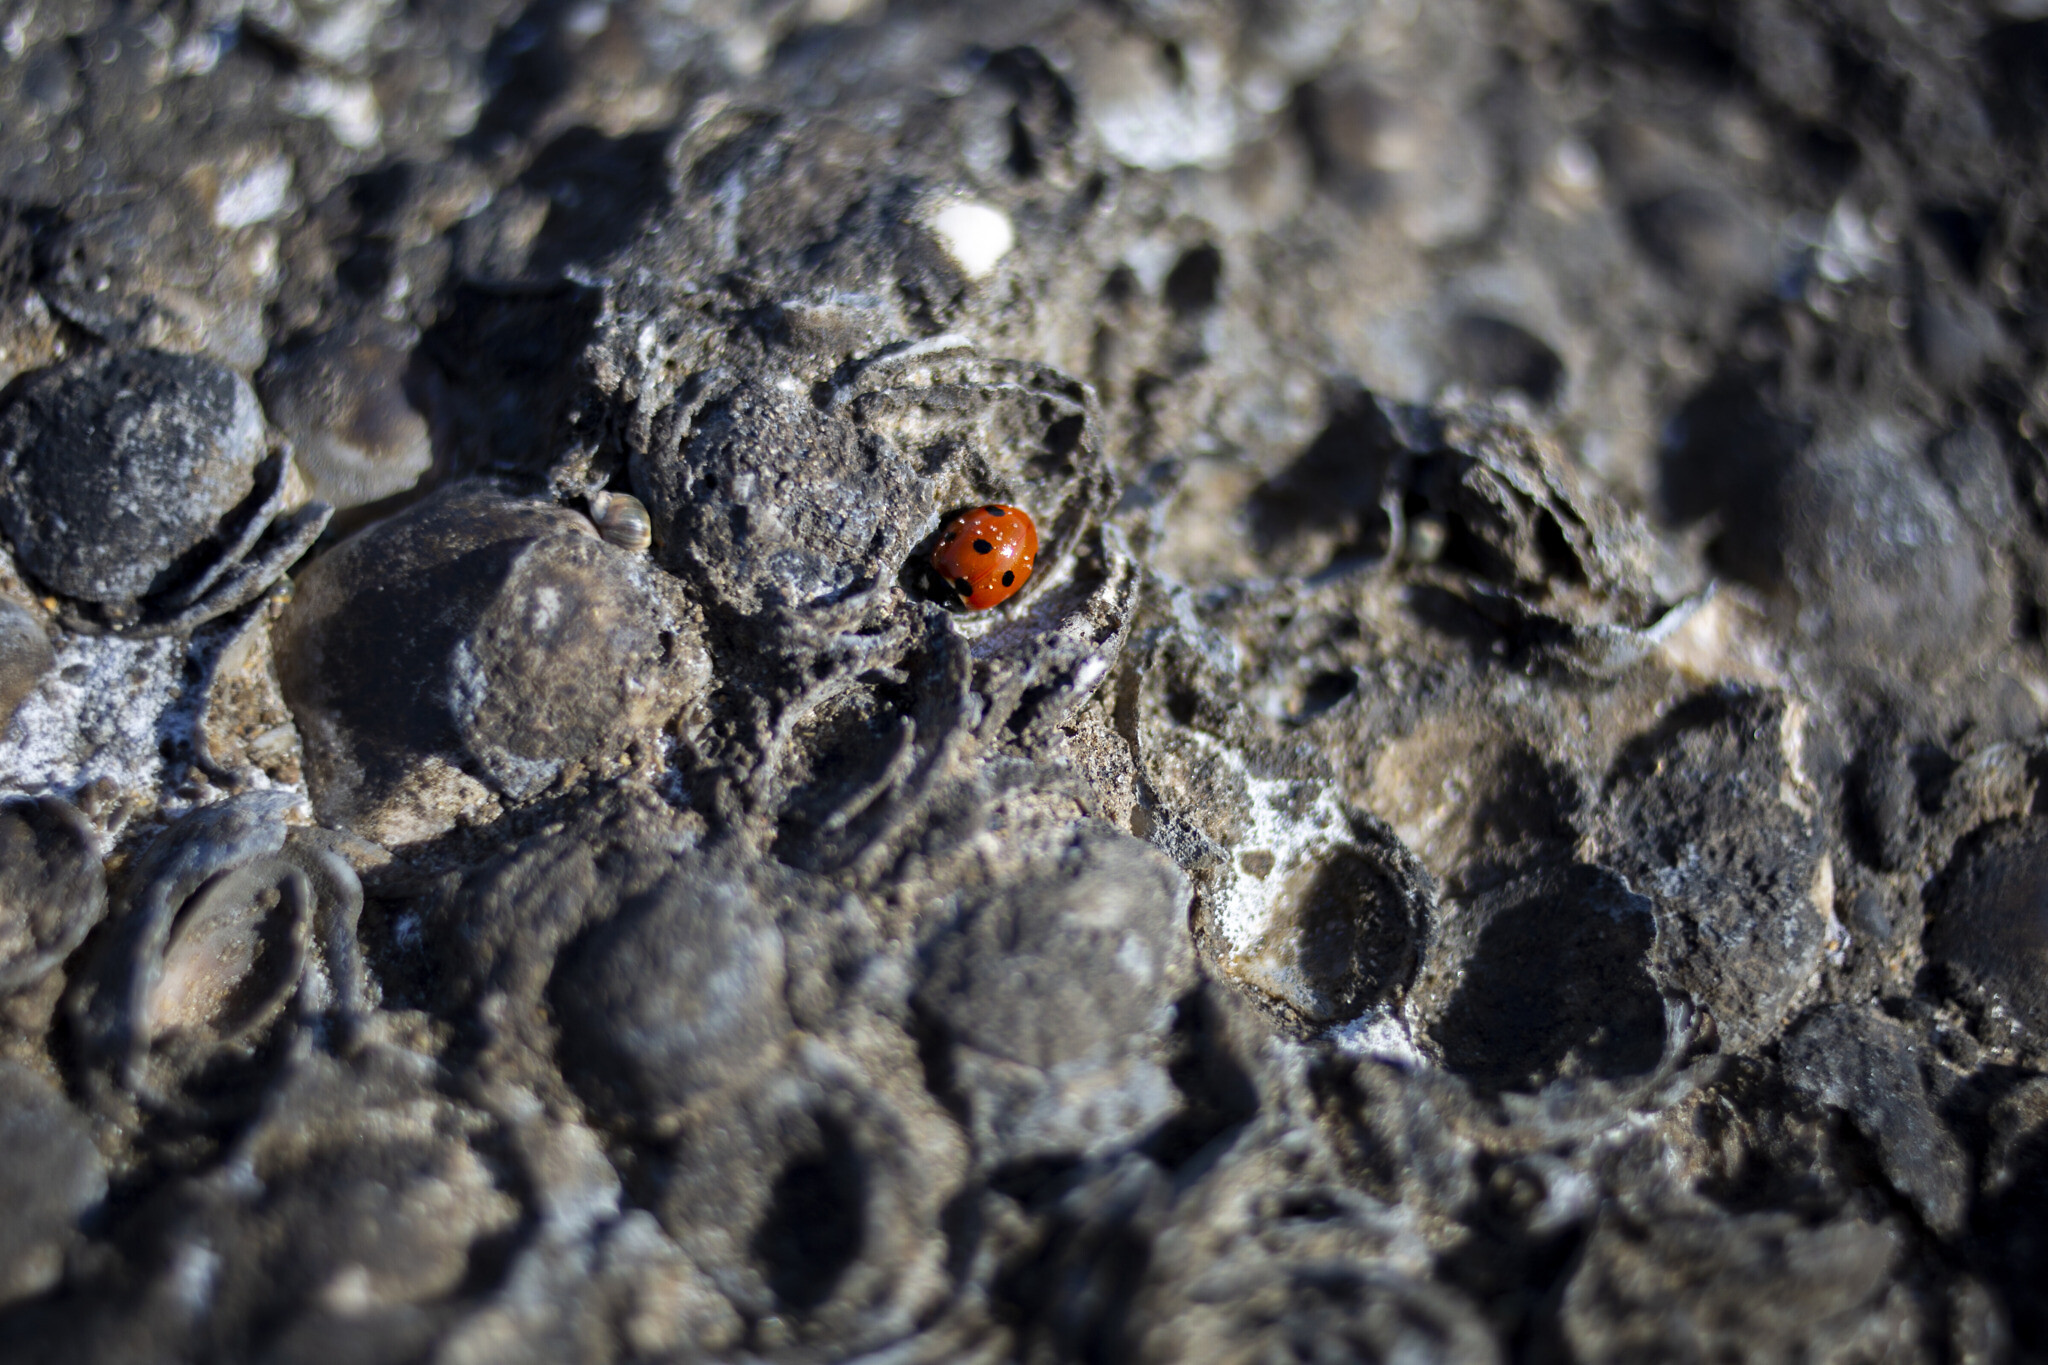 A ladybug rests on tar-covered rocks and shells after an oil spill in the Mediterranean Sea, at Tel-Dor Nature Reserve in Nahsholim, Israel; Tuesday, Feb. 23, 2021. (AP/Ariel Schalit)